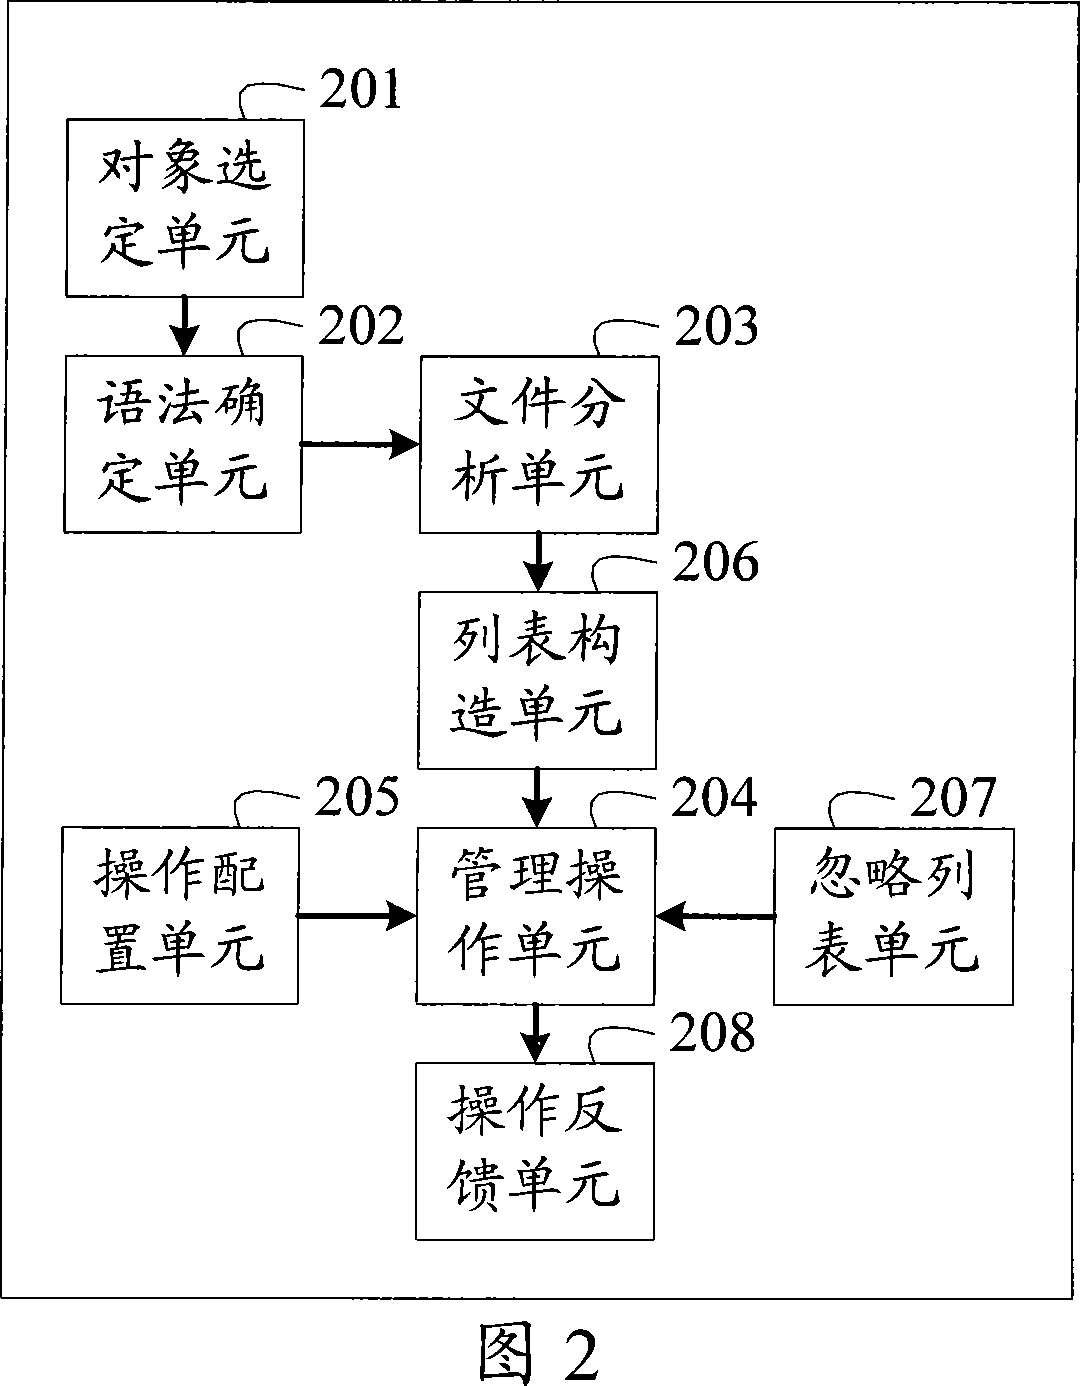 Document configuration managing method and device based on adduction relationship